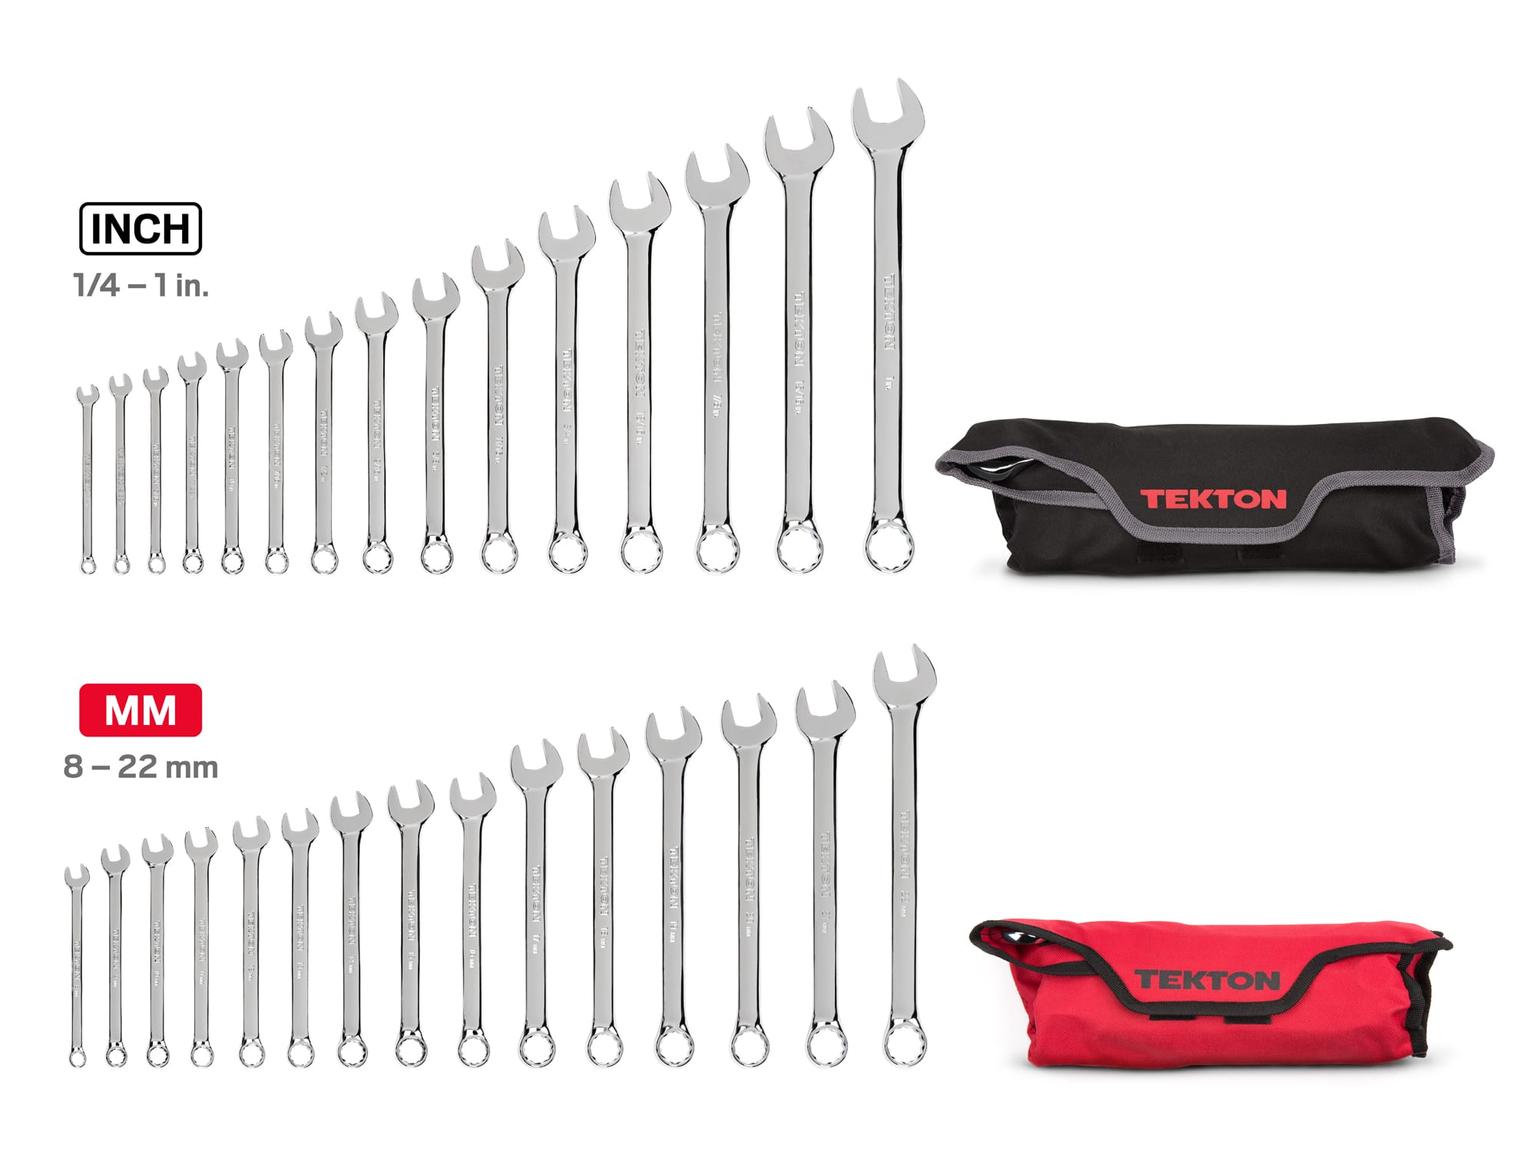 TEKTON 90192-T Combination Wrench Set with Pouch, 30-Piece (1/4 - 1 in., 8 - 22 mm)